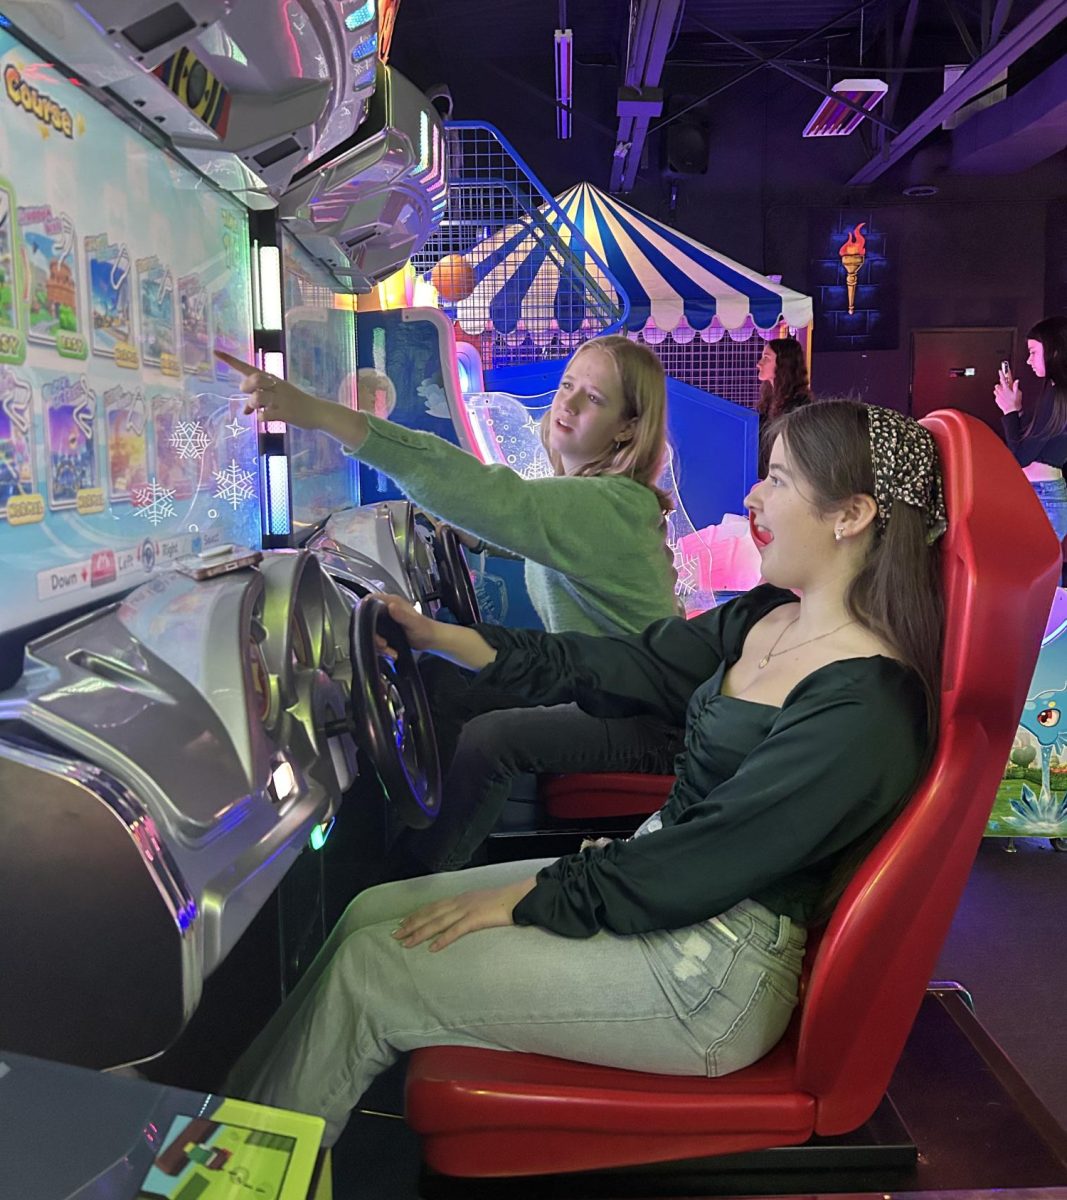 French National Honor Society (FNHS) members Greer Bezemek-Aguilar ‘25 and Ella Bearman ‘24 play Mario Kart in the arcade at Monster Mini Golf Feb. 9. FNHS students played mini golf and arcade games with French exchange students from noon to 2:30 p.m. as a way to get to know them and welcome them to the U.S. Eight exchange students will spend three weeks attending classes, practicing their English and learning about American culture by staying with host families and shadowing students around the school. “I was a little nervous going in to [meet] them. I’m not great with socializing with strangers but it was fun. They all seemed really nice,” Bearman said. “I’m looking forward to getting to know them better and learning about cultural differences in the American and French high school experiences.”